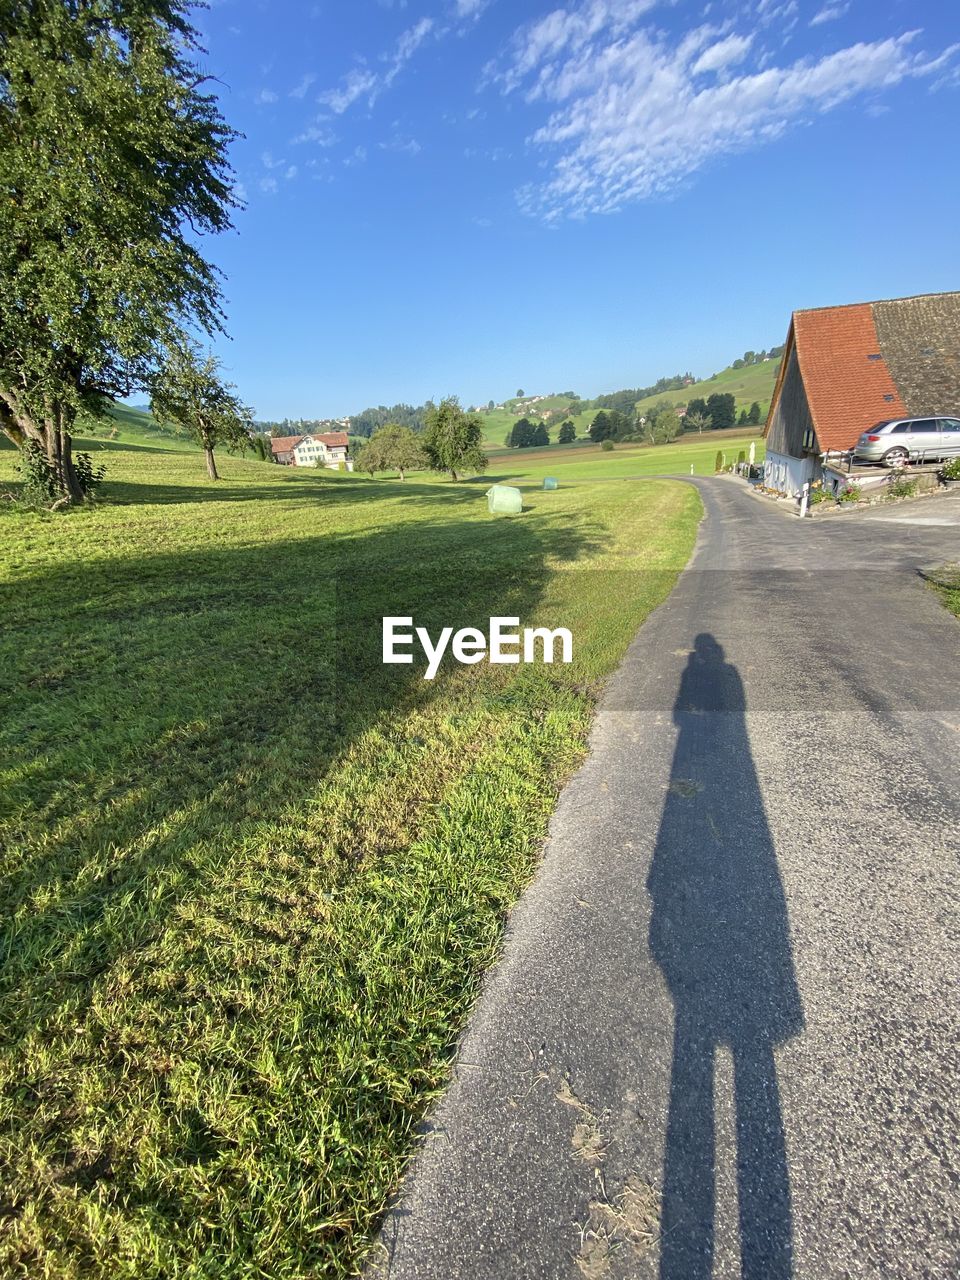 SHADOW OF PERSON ON ROAD AMIDST FIELD